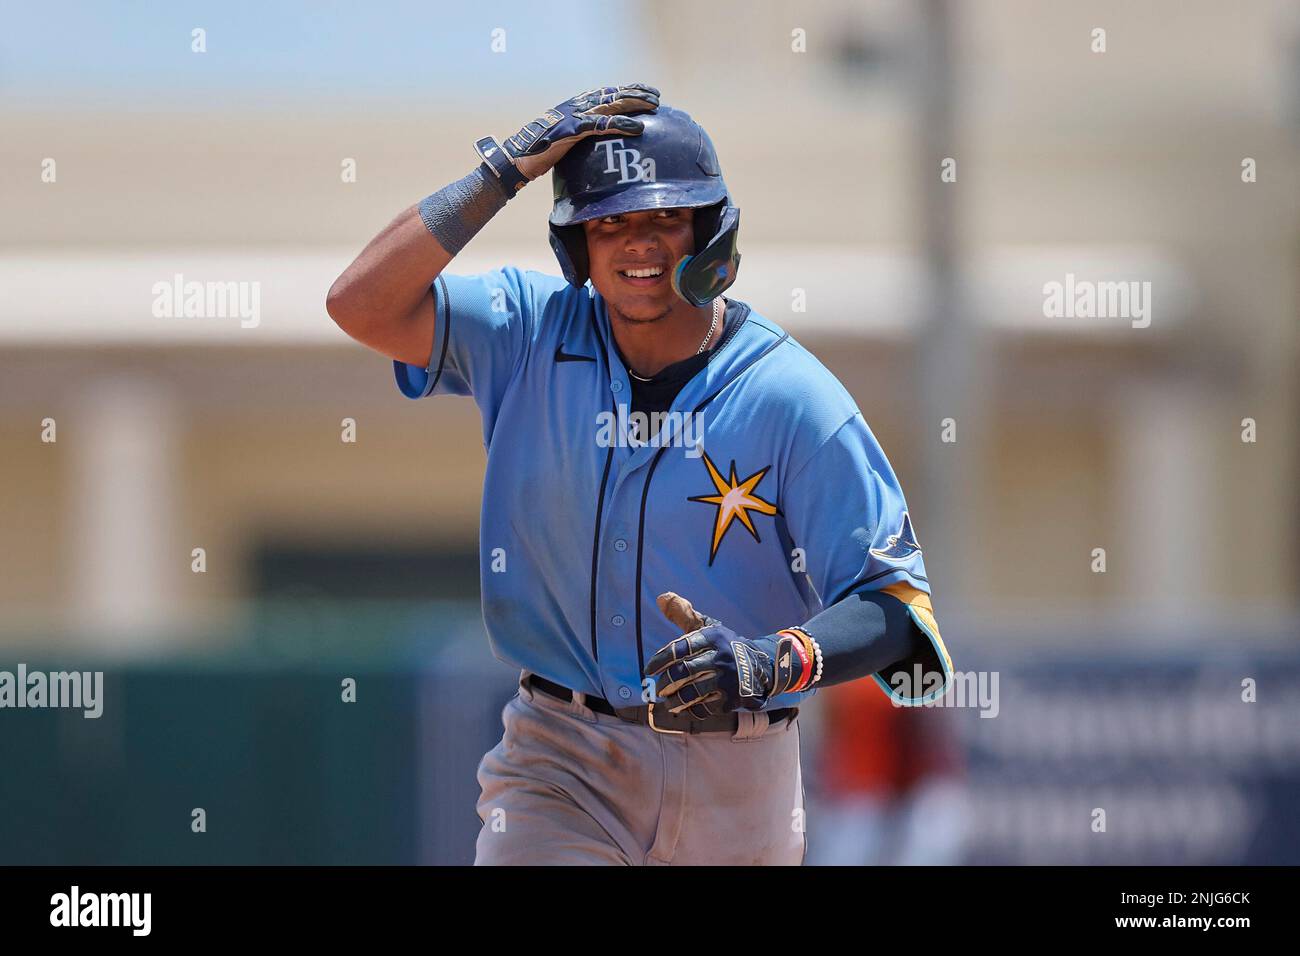 FCL Rays catcher Felix Salguera (86) rounds the bases after